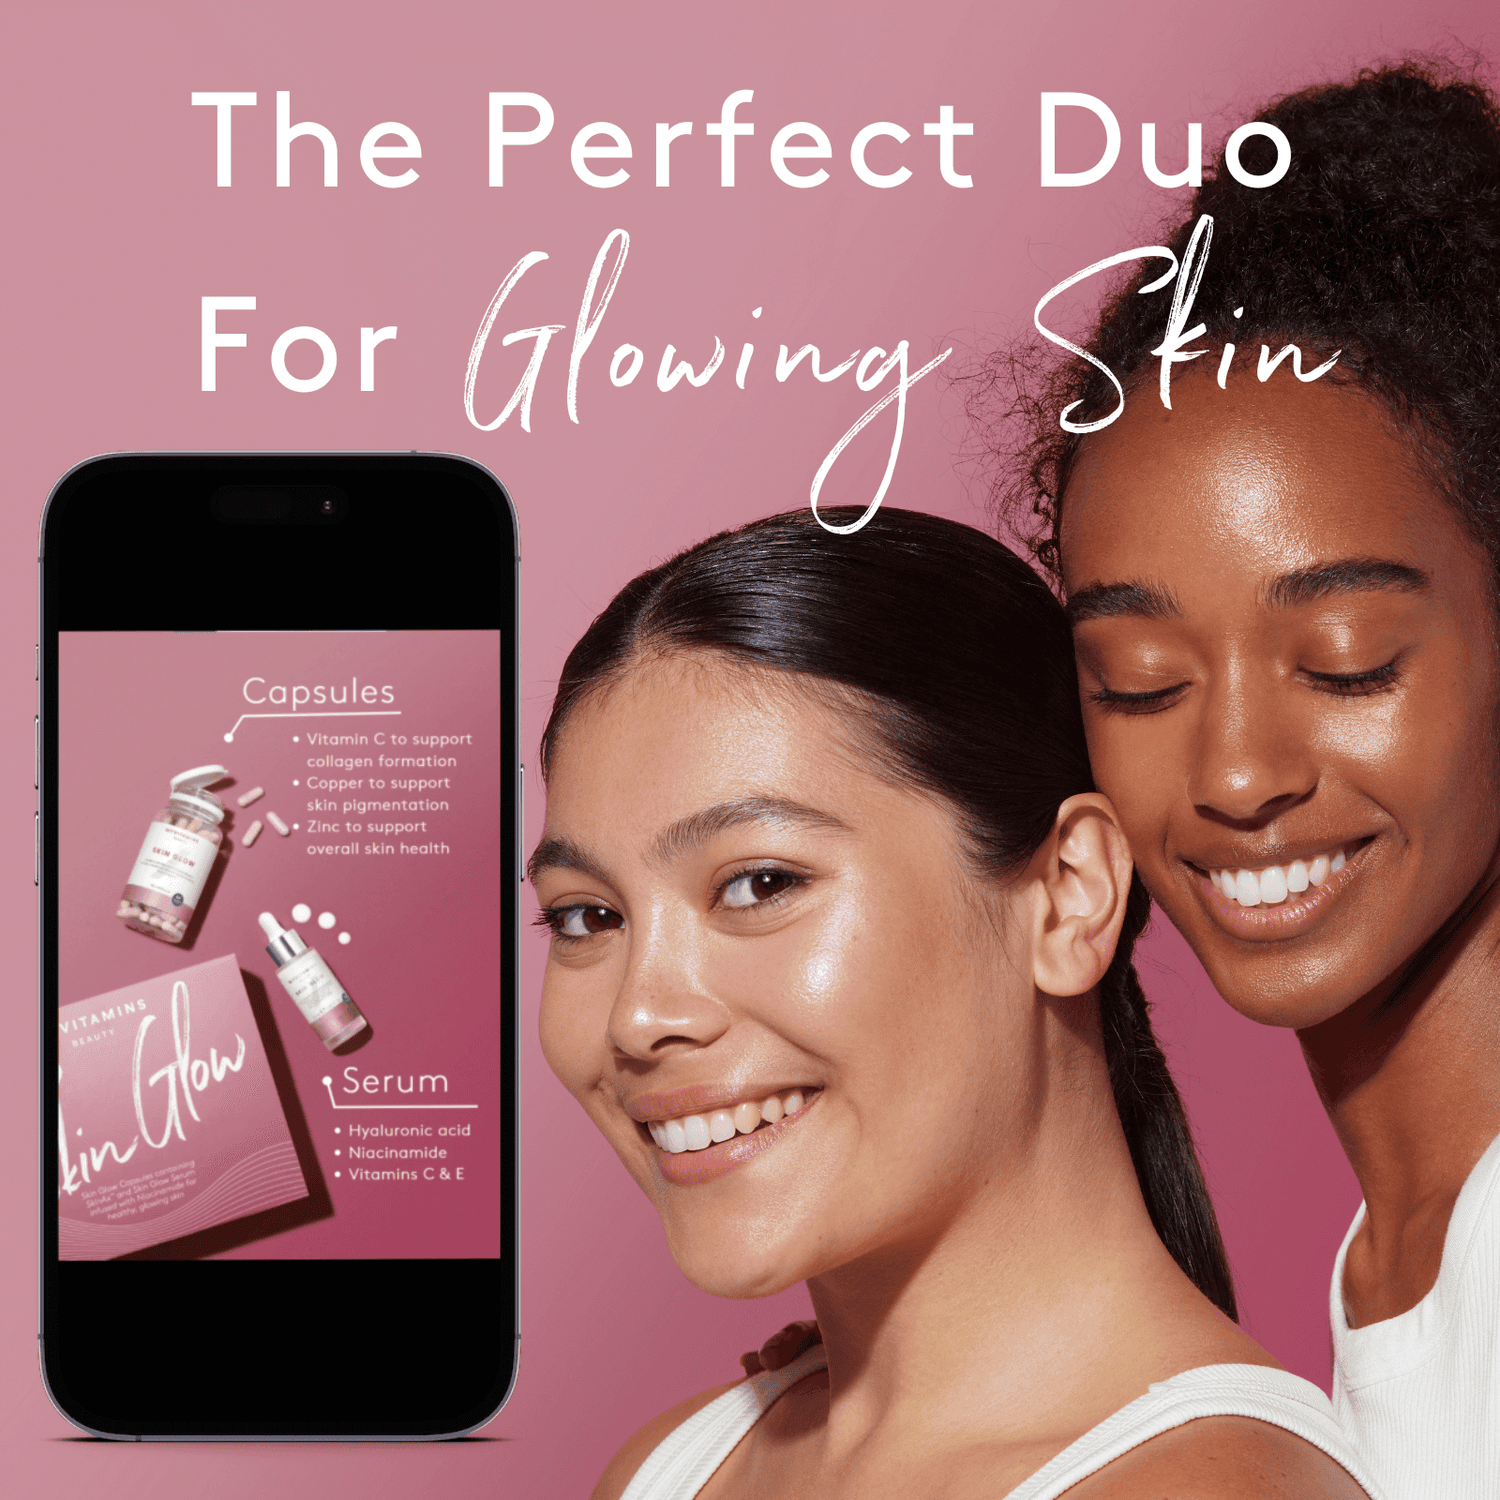 Myvitamins Skin Glow Duo "How to" Guide